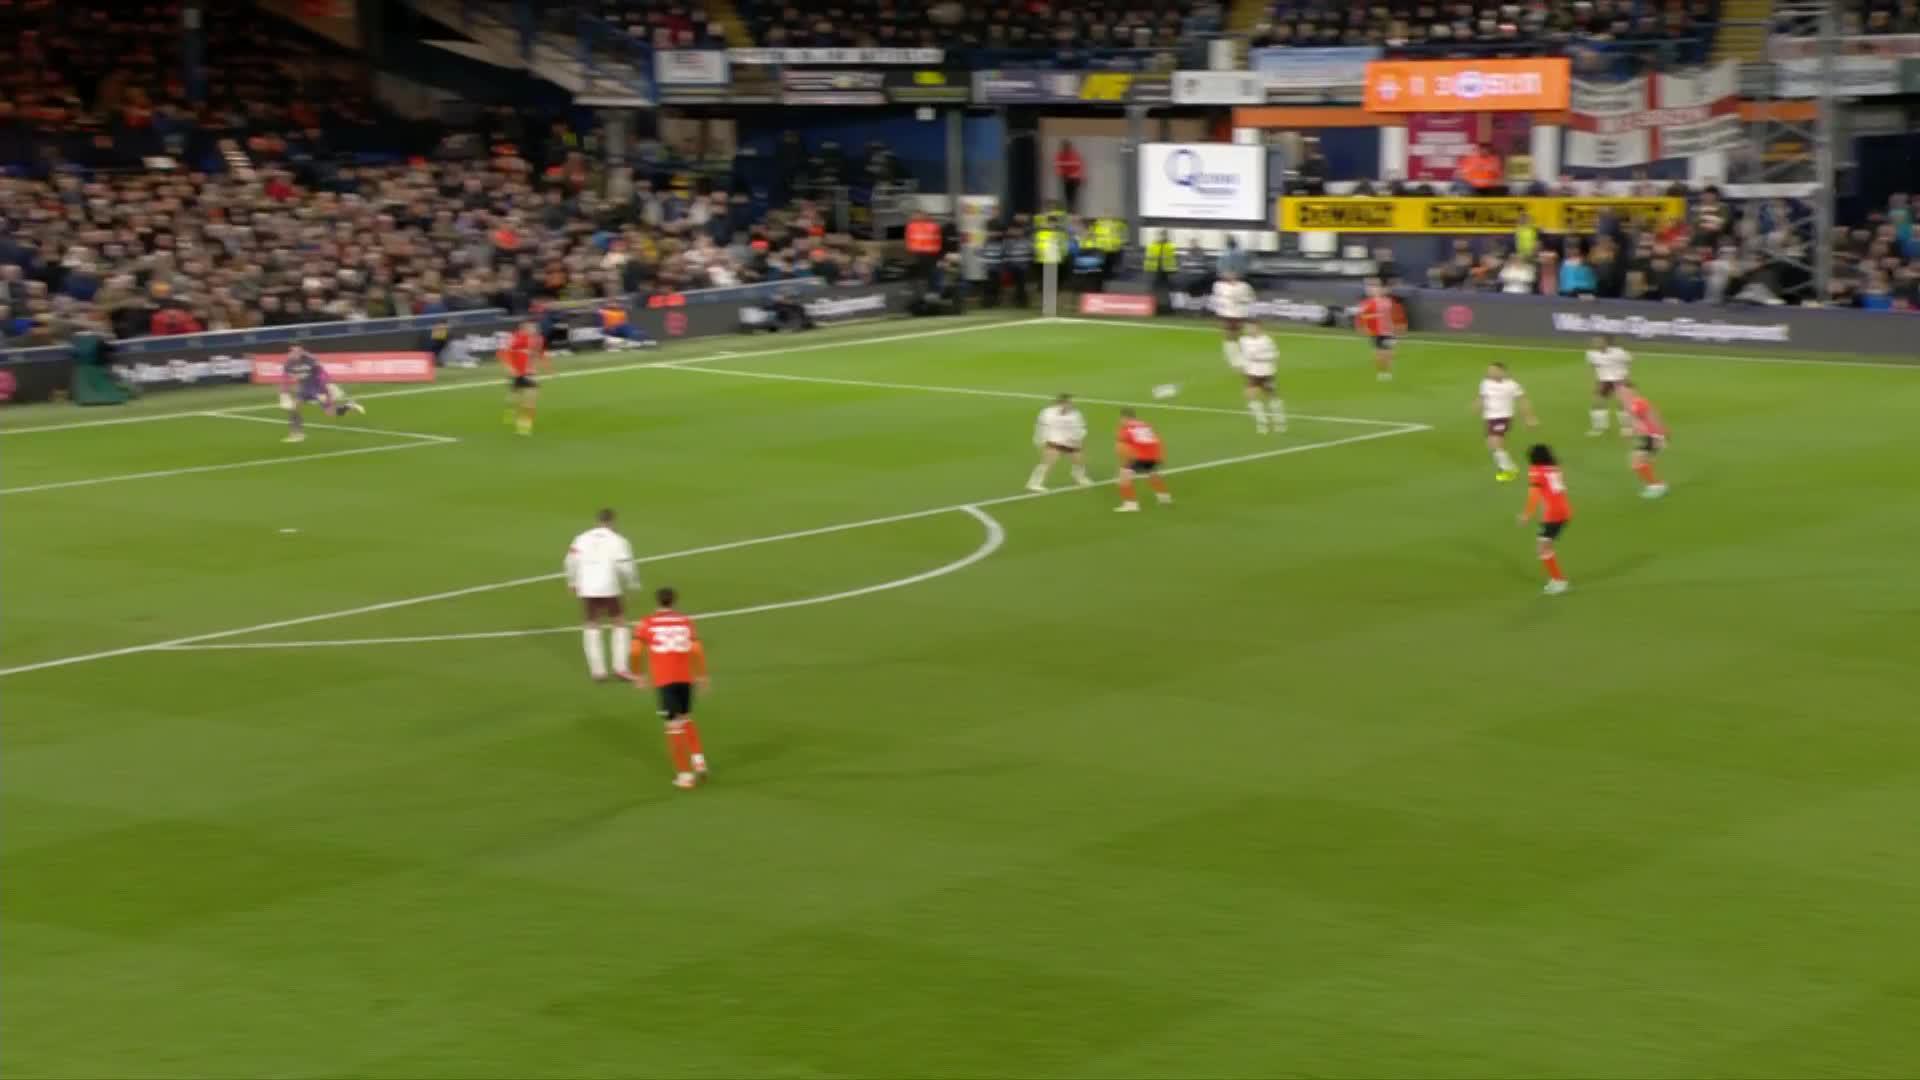 This assist from Ross Barkley 😳It's another special goal from Jordan Clark for @LutonTown 👏#EmiratesFACup